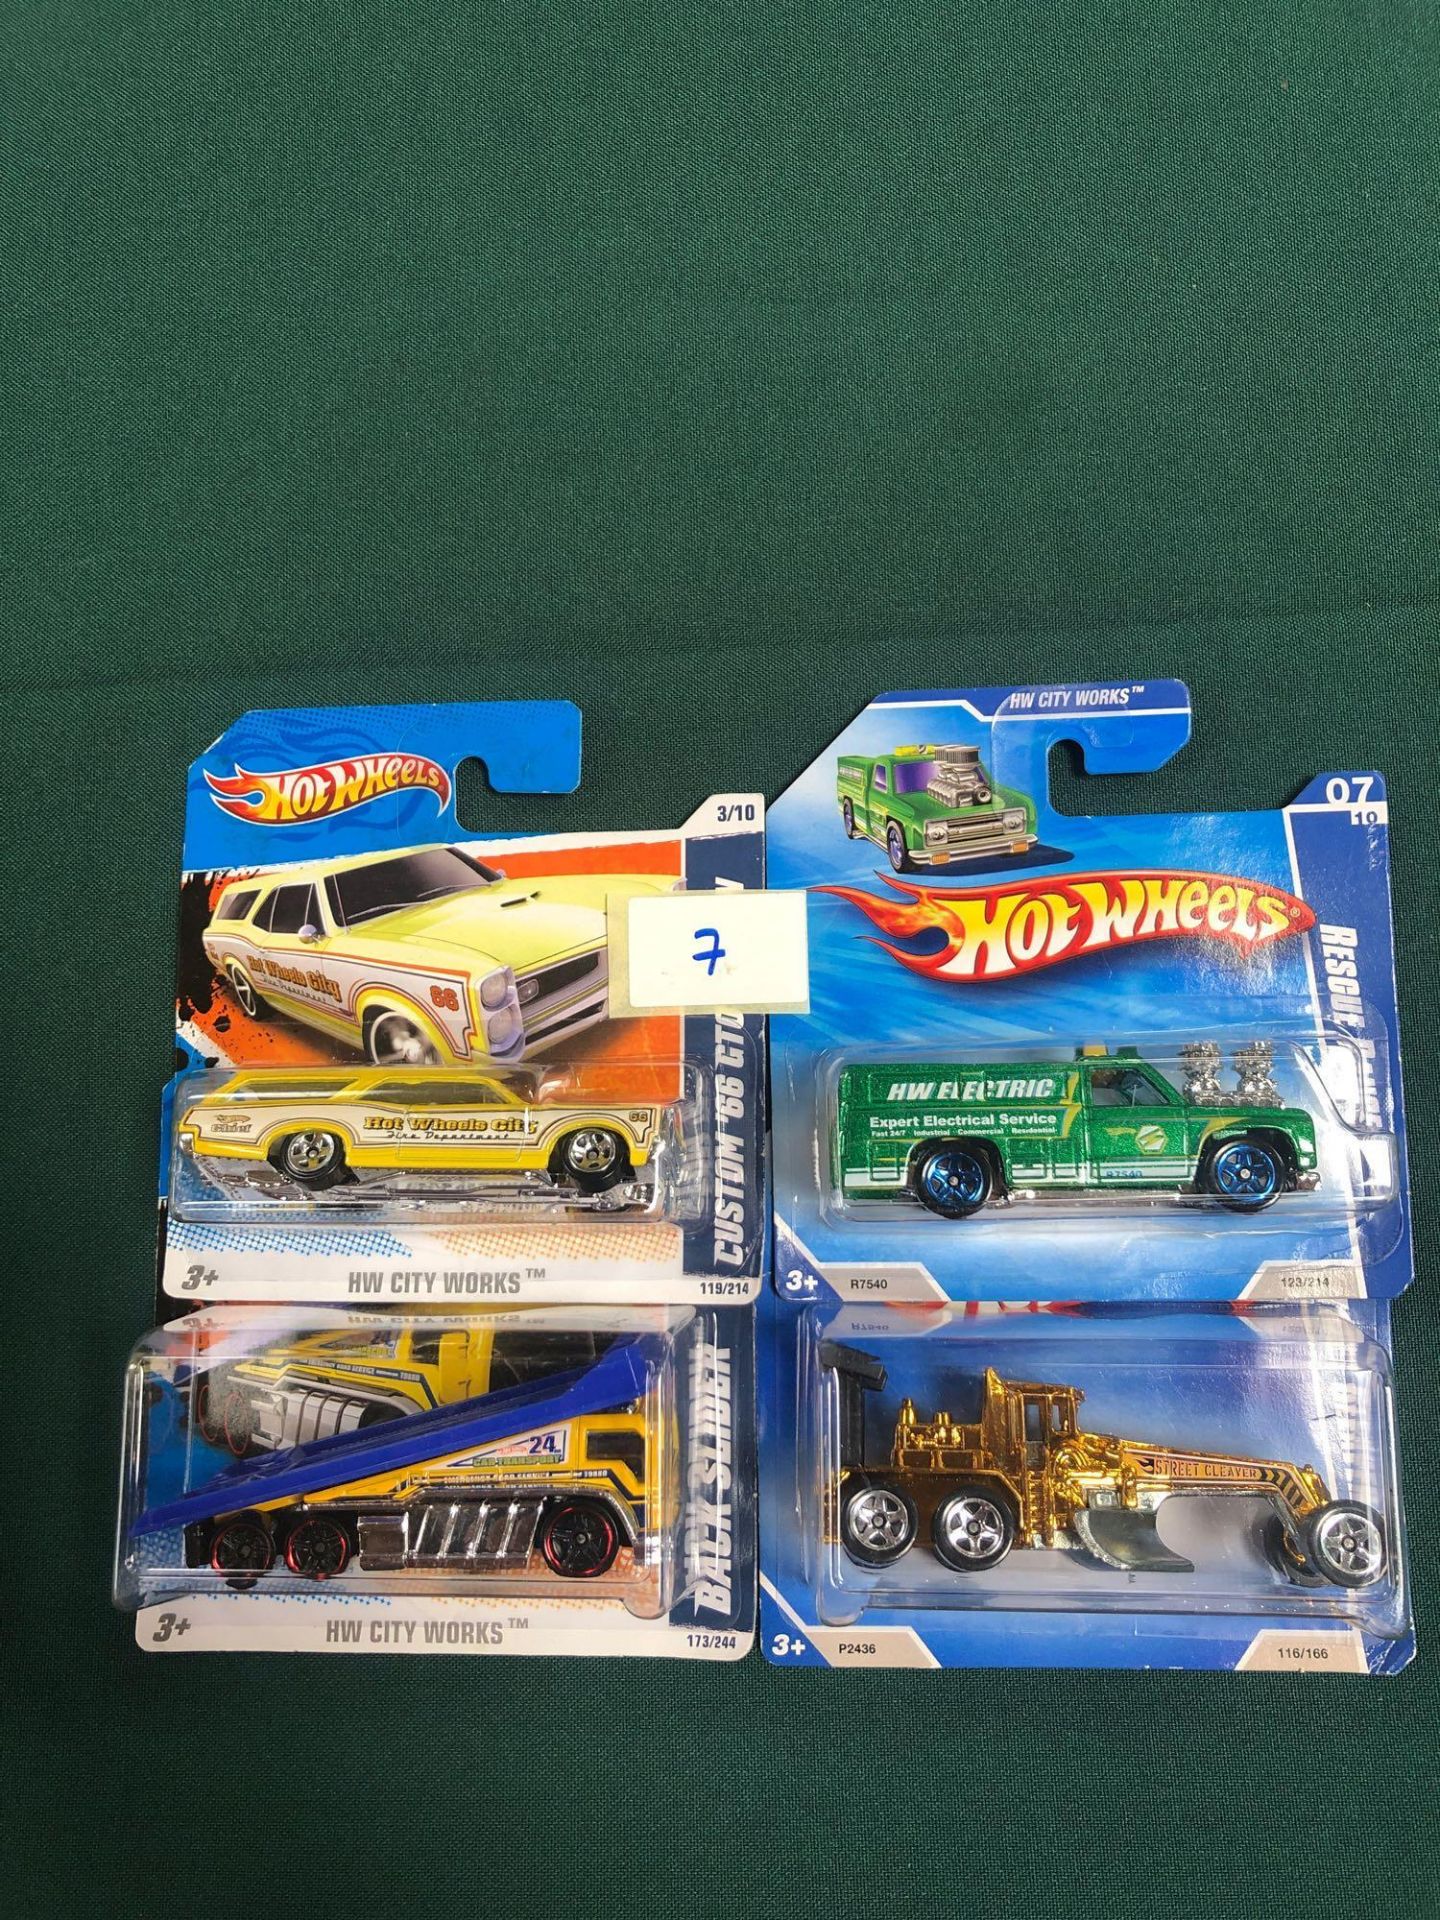 4x Hot Wheels HW City Works Diecast Vehicles - On Unopened Card, Comprising Of; Custom 66 GTO Wagon,